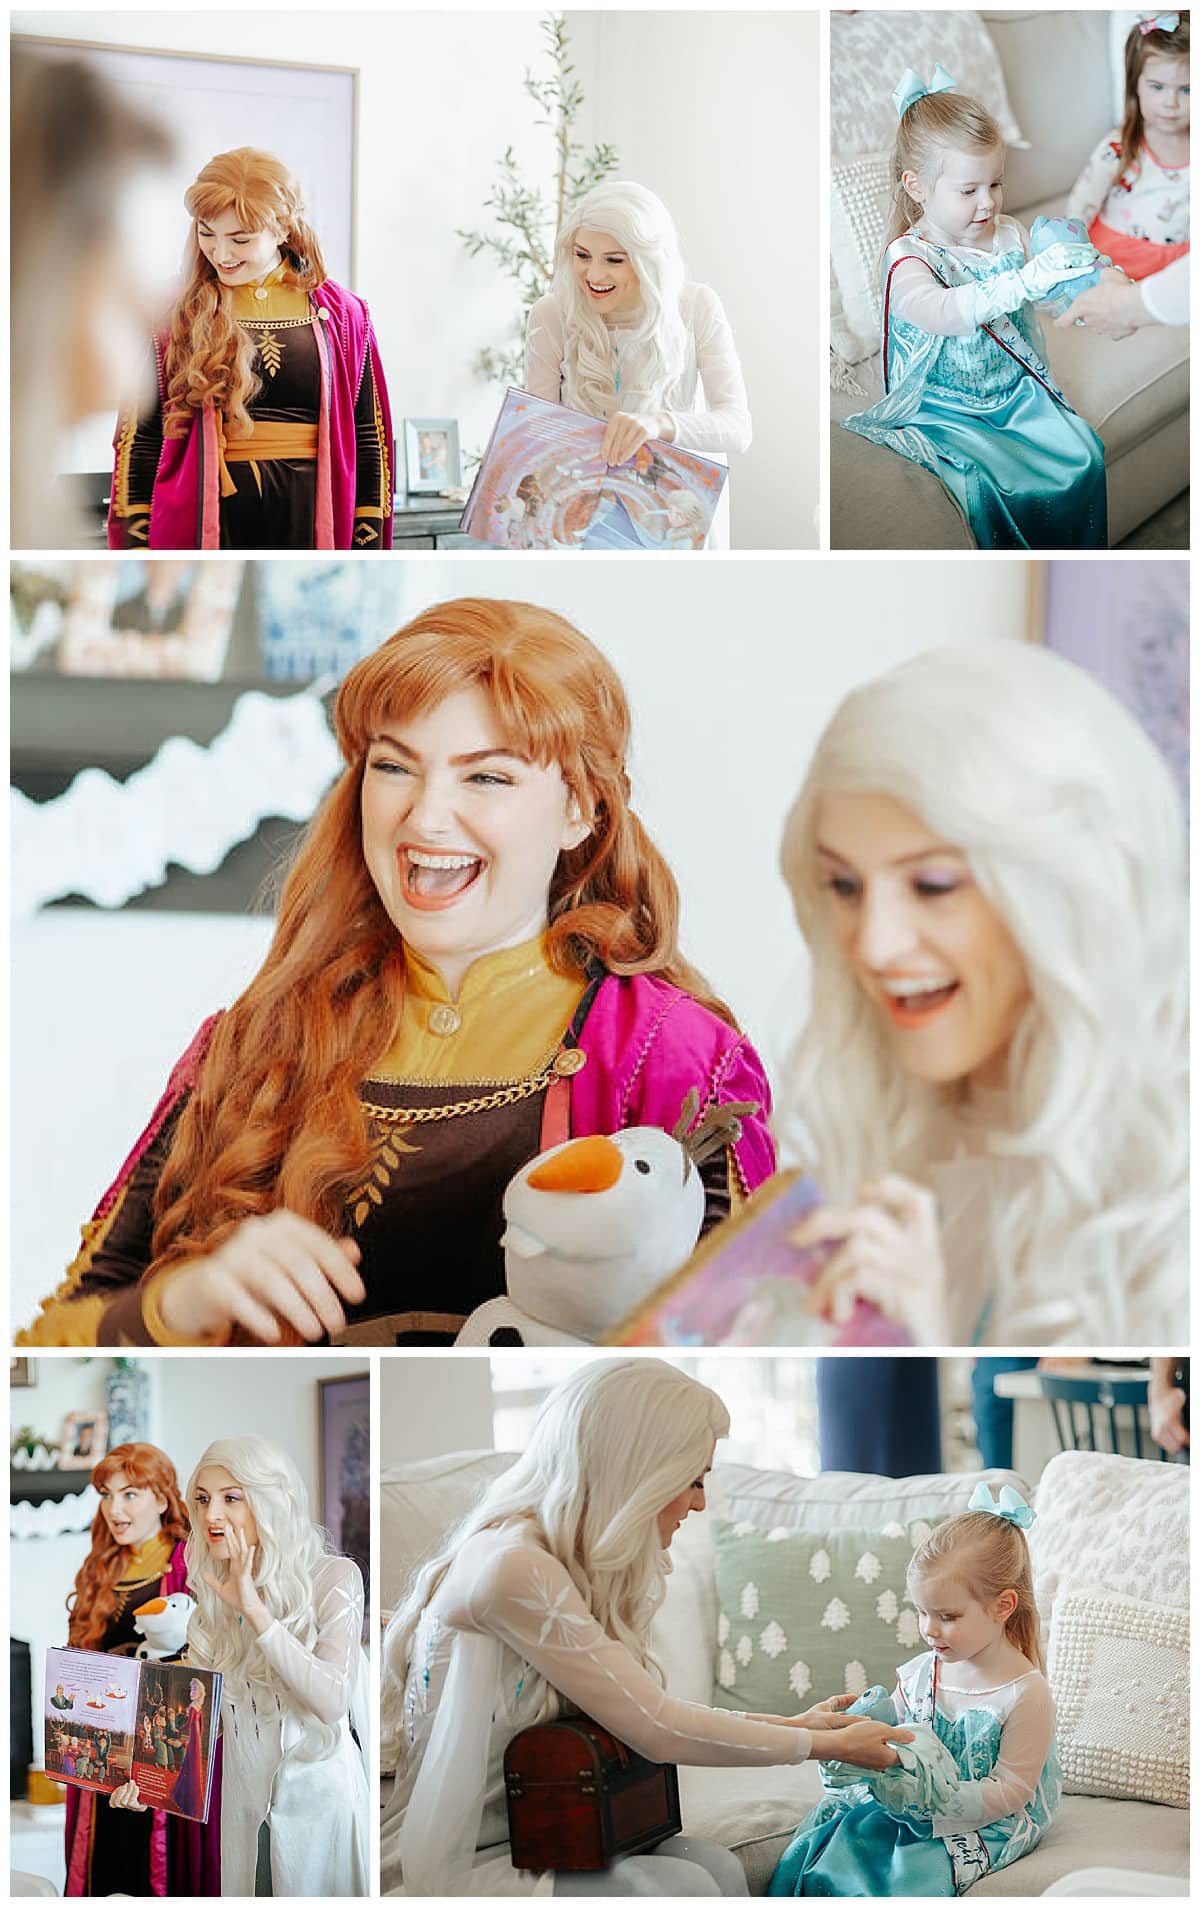 Collage of pictures showing Elsa and Anna from Frozen at a birthday party